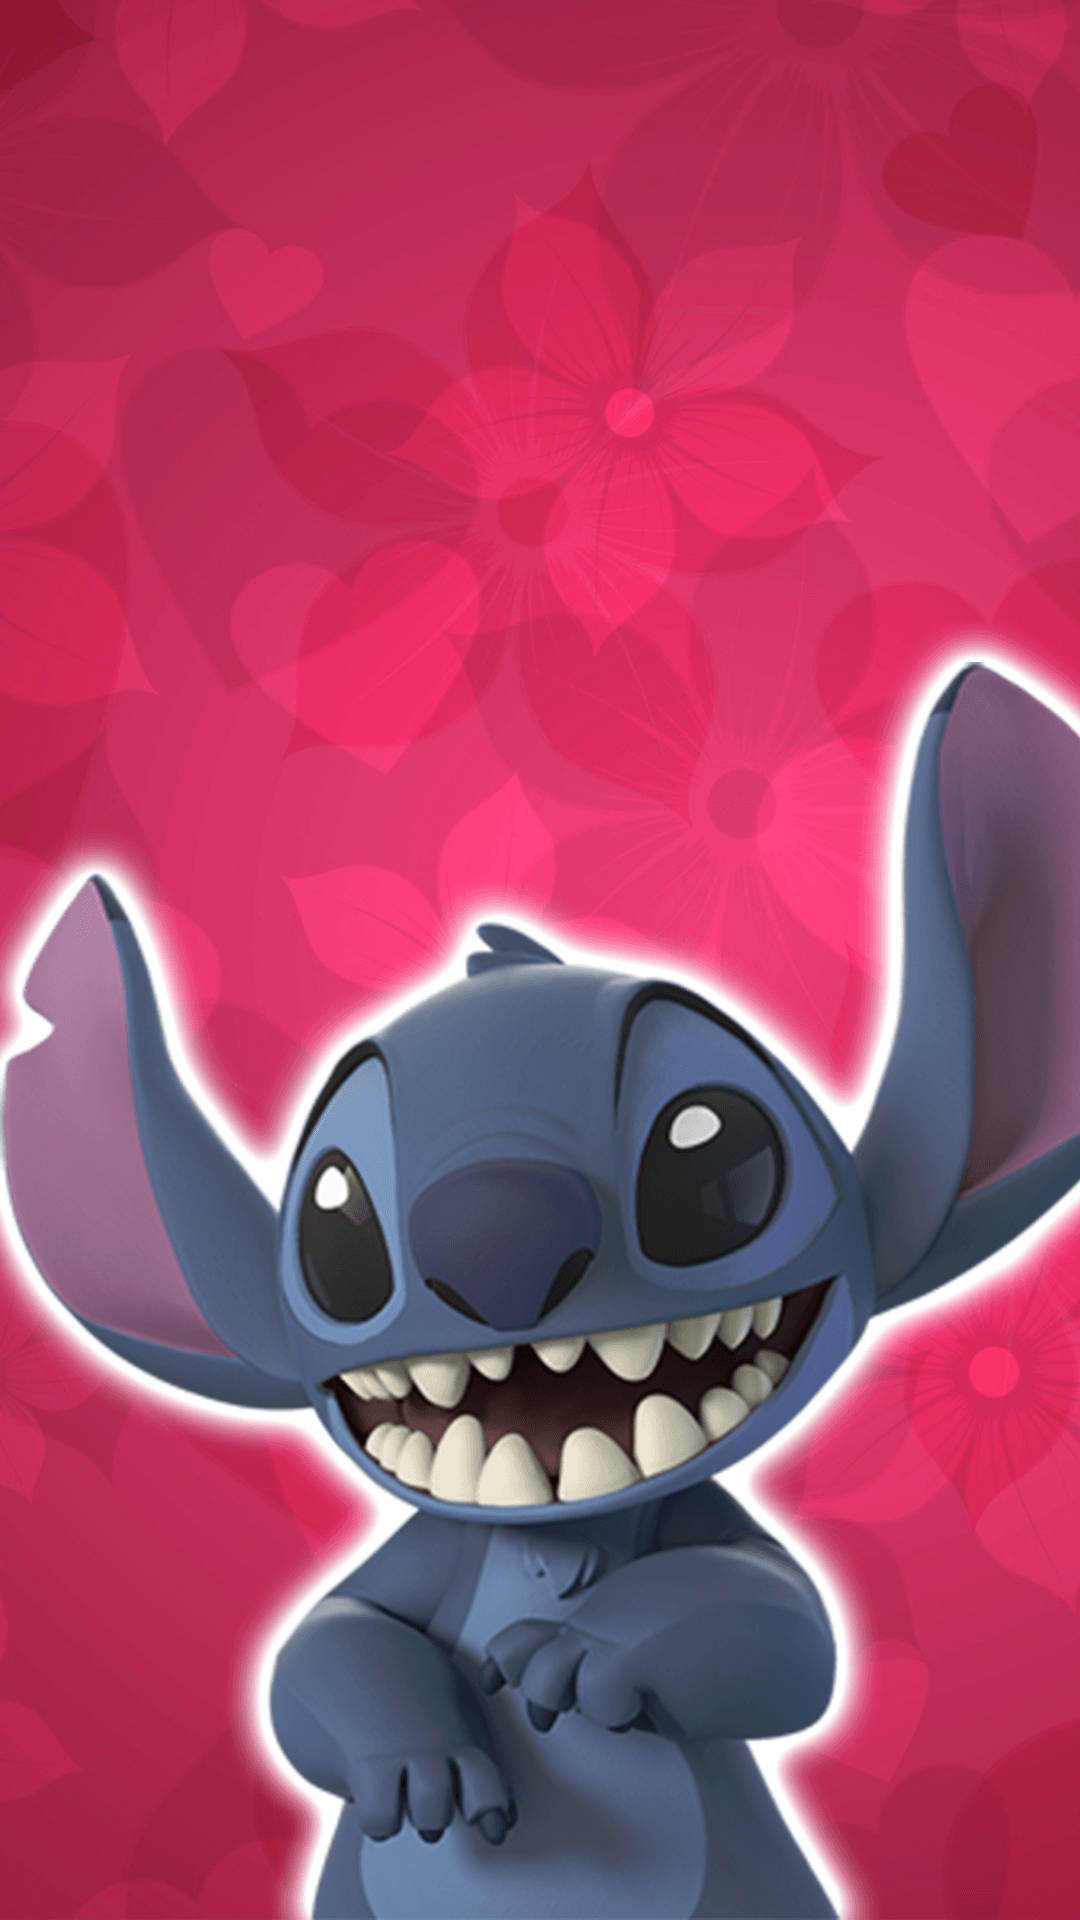 Smiling Stitch 3d Rendered Background